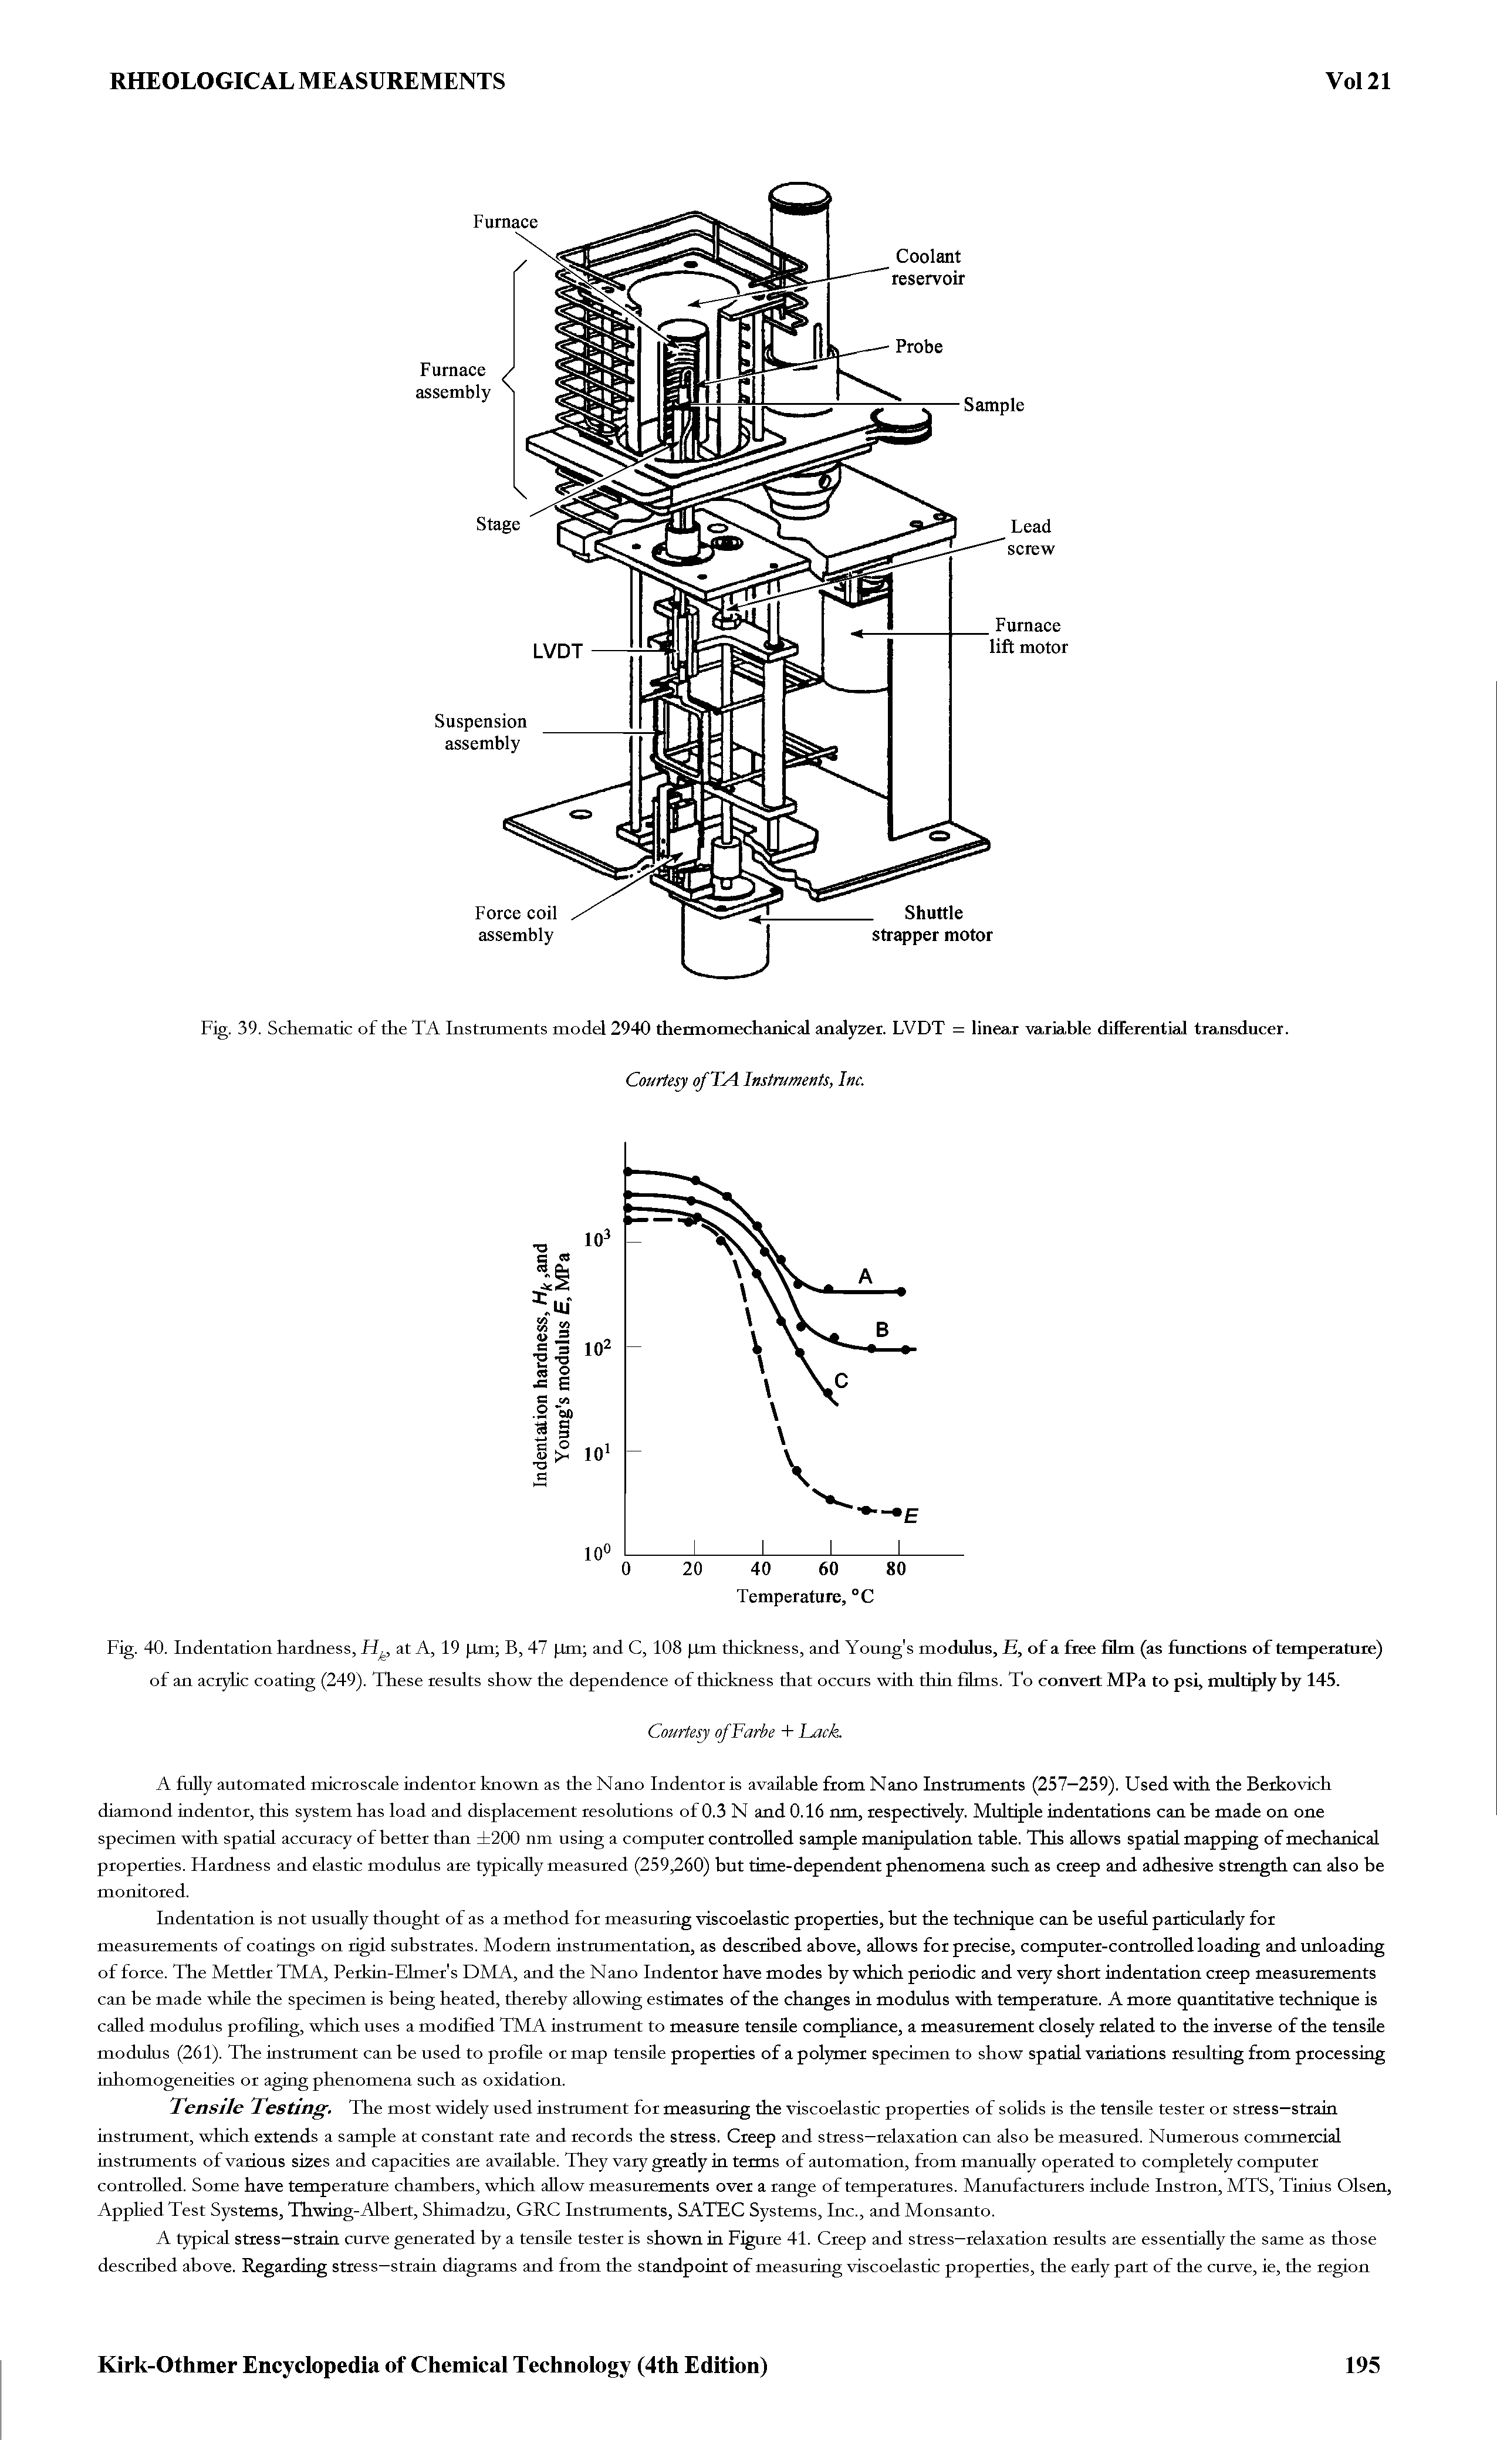 Fig. 40. Indentation hardness, at A, 19 Jim B, 47 Jim and C, 108 Jim thickness, and Young s modulus, E, of a free film (as functions of temperature) of an acrylic coating (249). These results show the dependence of thickness that occurs with thin films. To convert MPa to psi, multiply by 145.